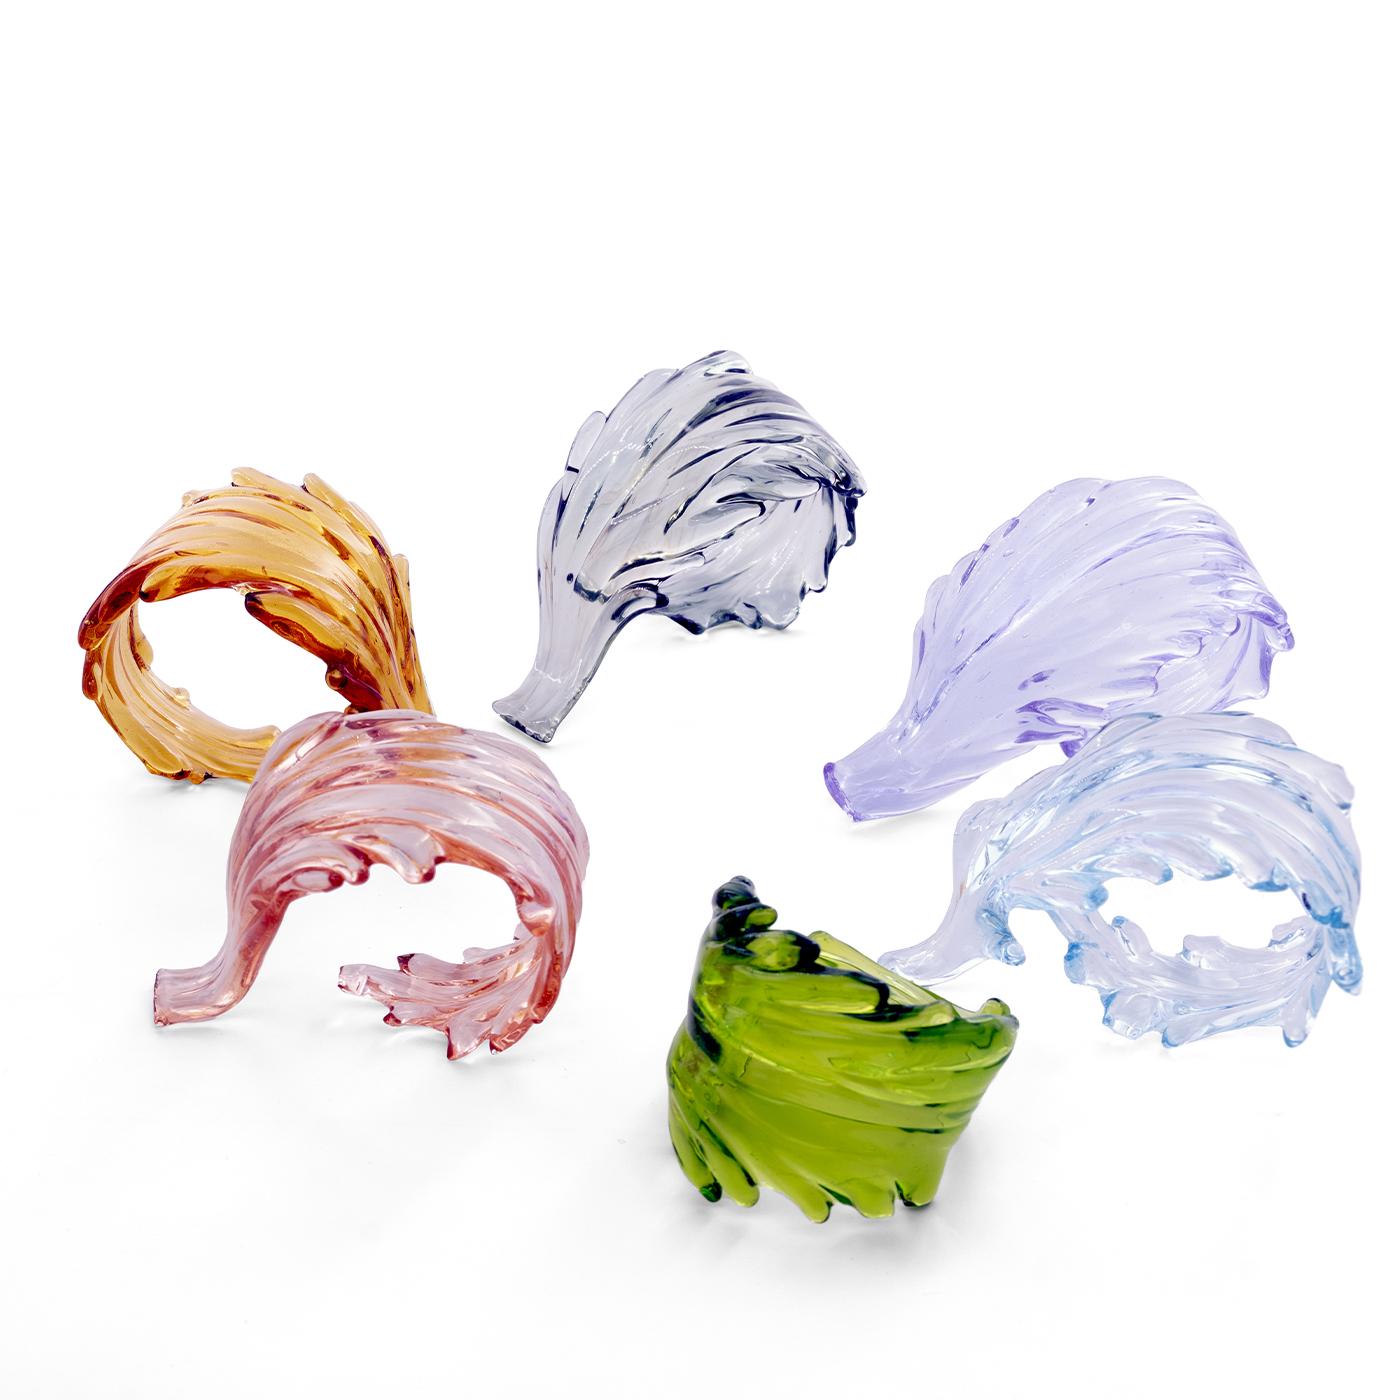 Set of 6 Murano glass-colored leaves Napkin rings. Handcrafted in Venice. Colors include lime, gray, orange, light blue, and violet.